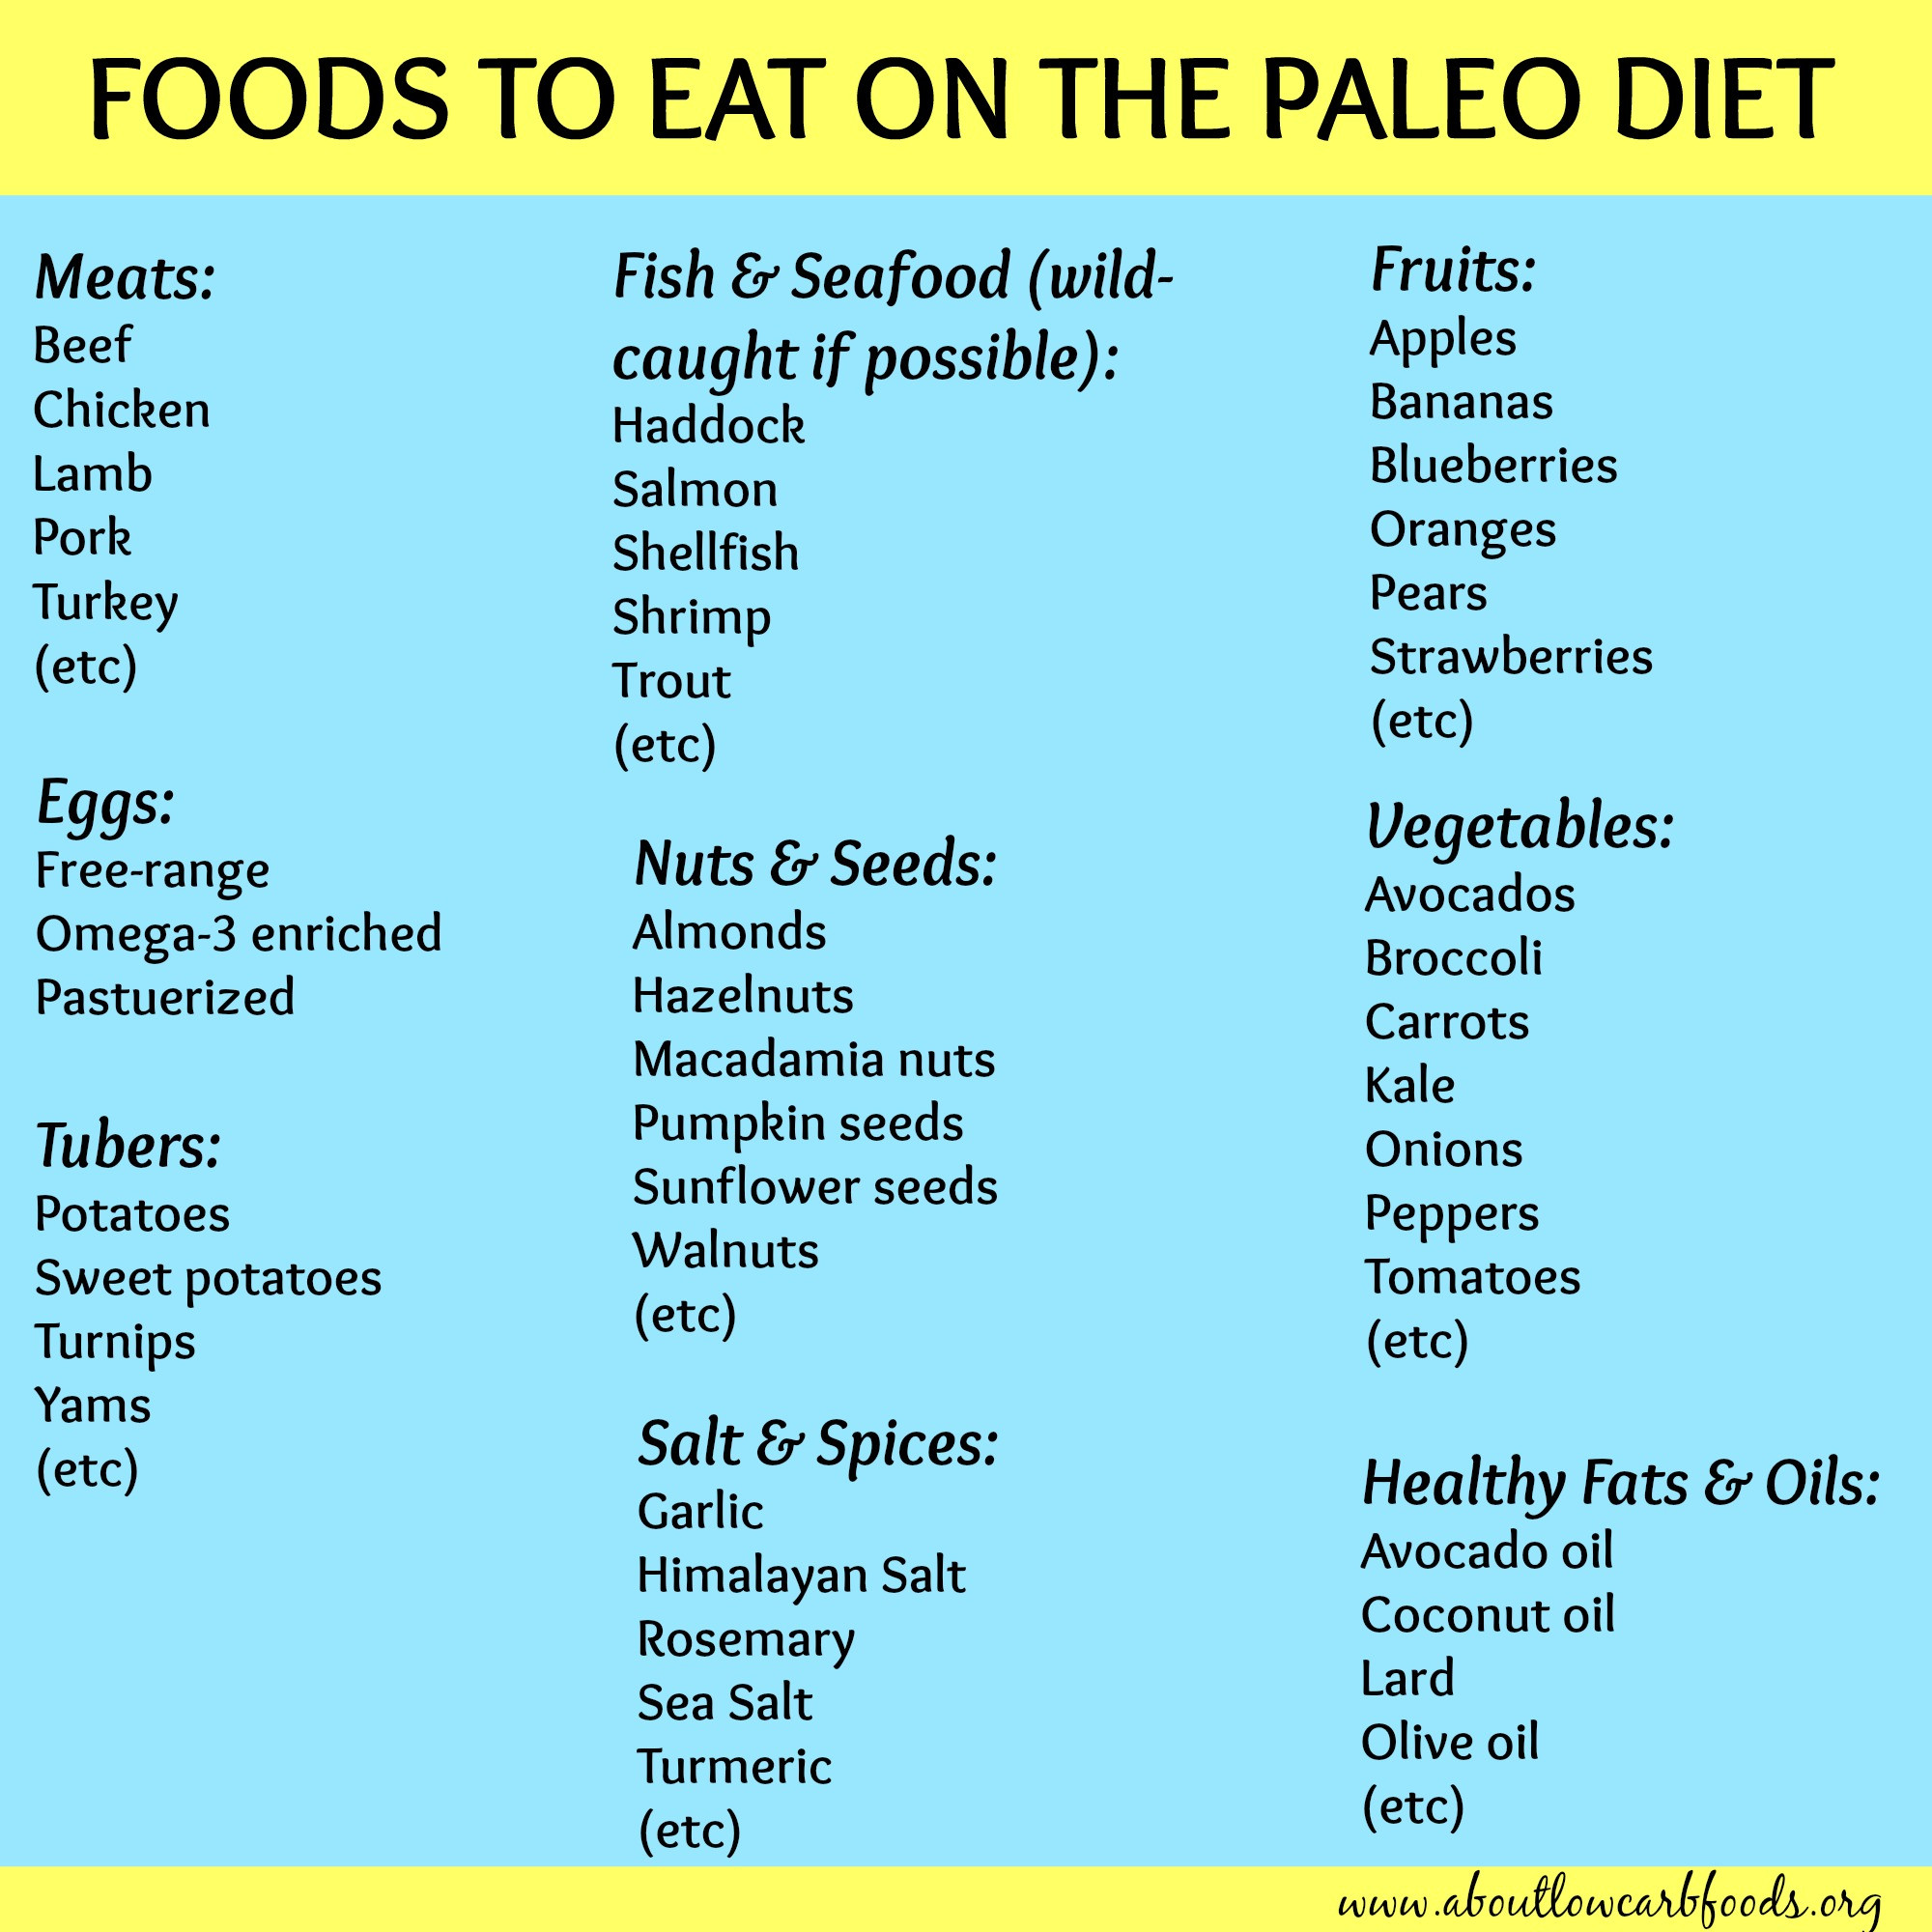 Paleo Diet Weight Loss Meal Plan
 Paleo Diet Meal Plan Why It’s So Popular About Low Carb